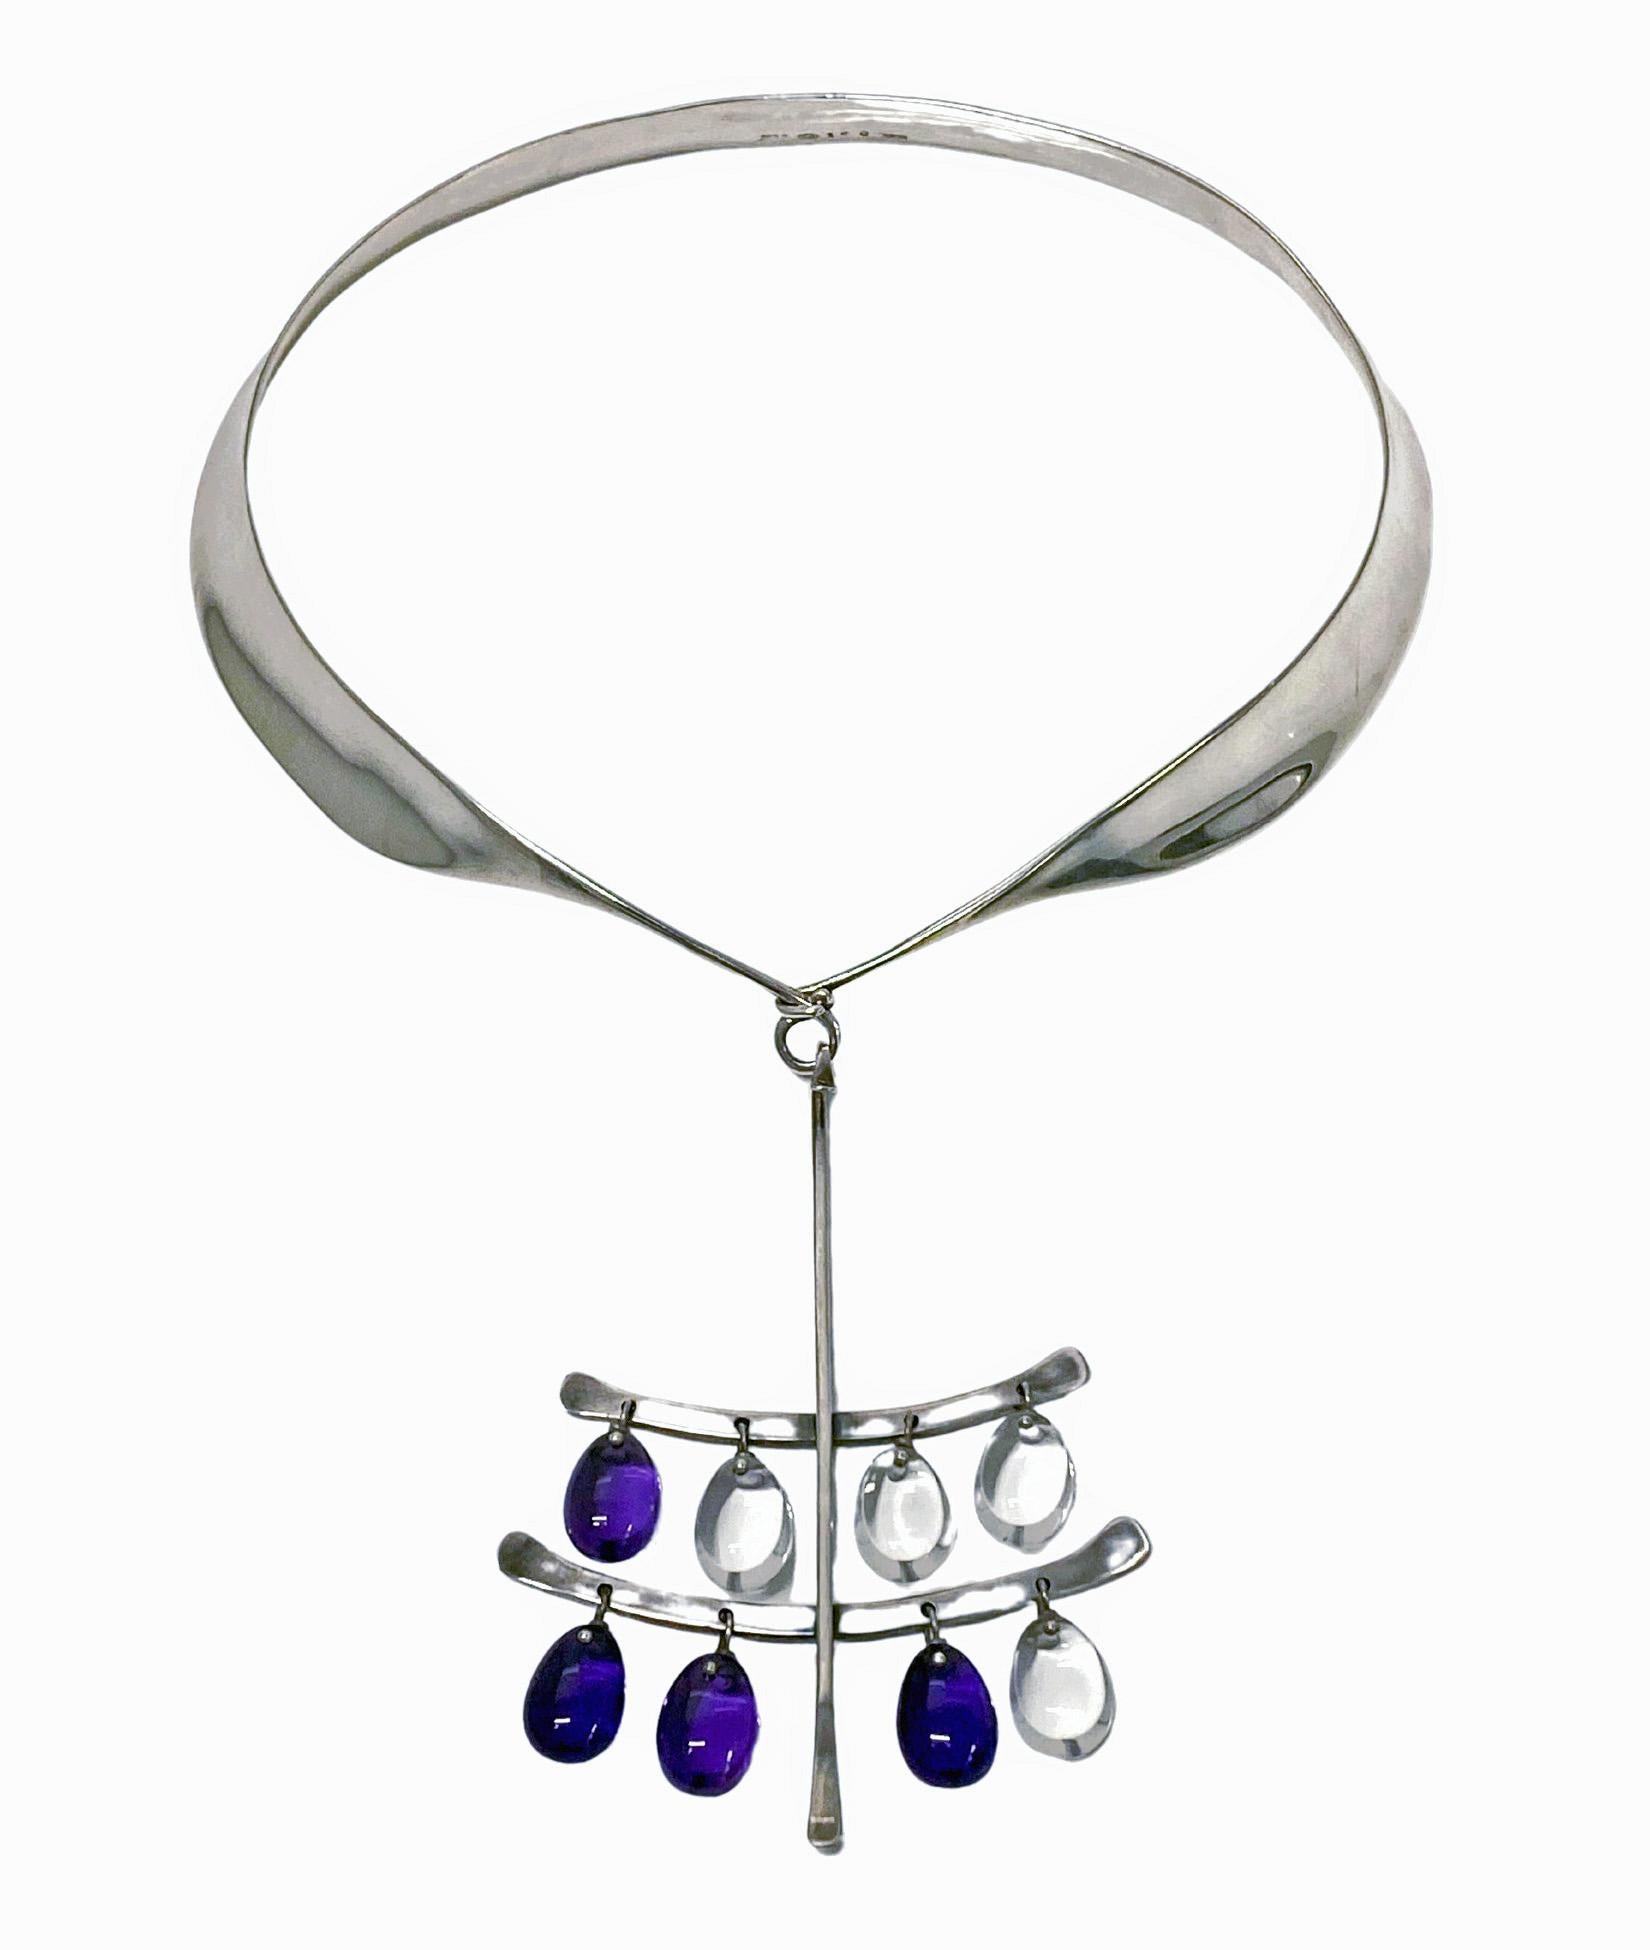 Rare Sterling Silver Necklace and double tear drop design no 135 with Amethyst and Quartz Drops Designed by Vivianna Torun Bulow-Hube for Georg Jensen C.1960, together with Necklet collar No 160. Pendant drop: 4 inches. Pendant width: 2.75 inches.